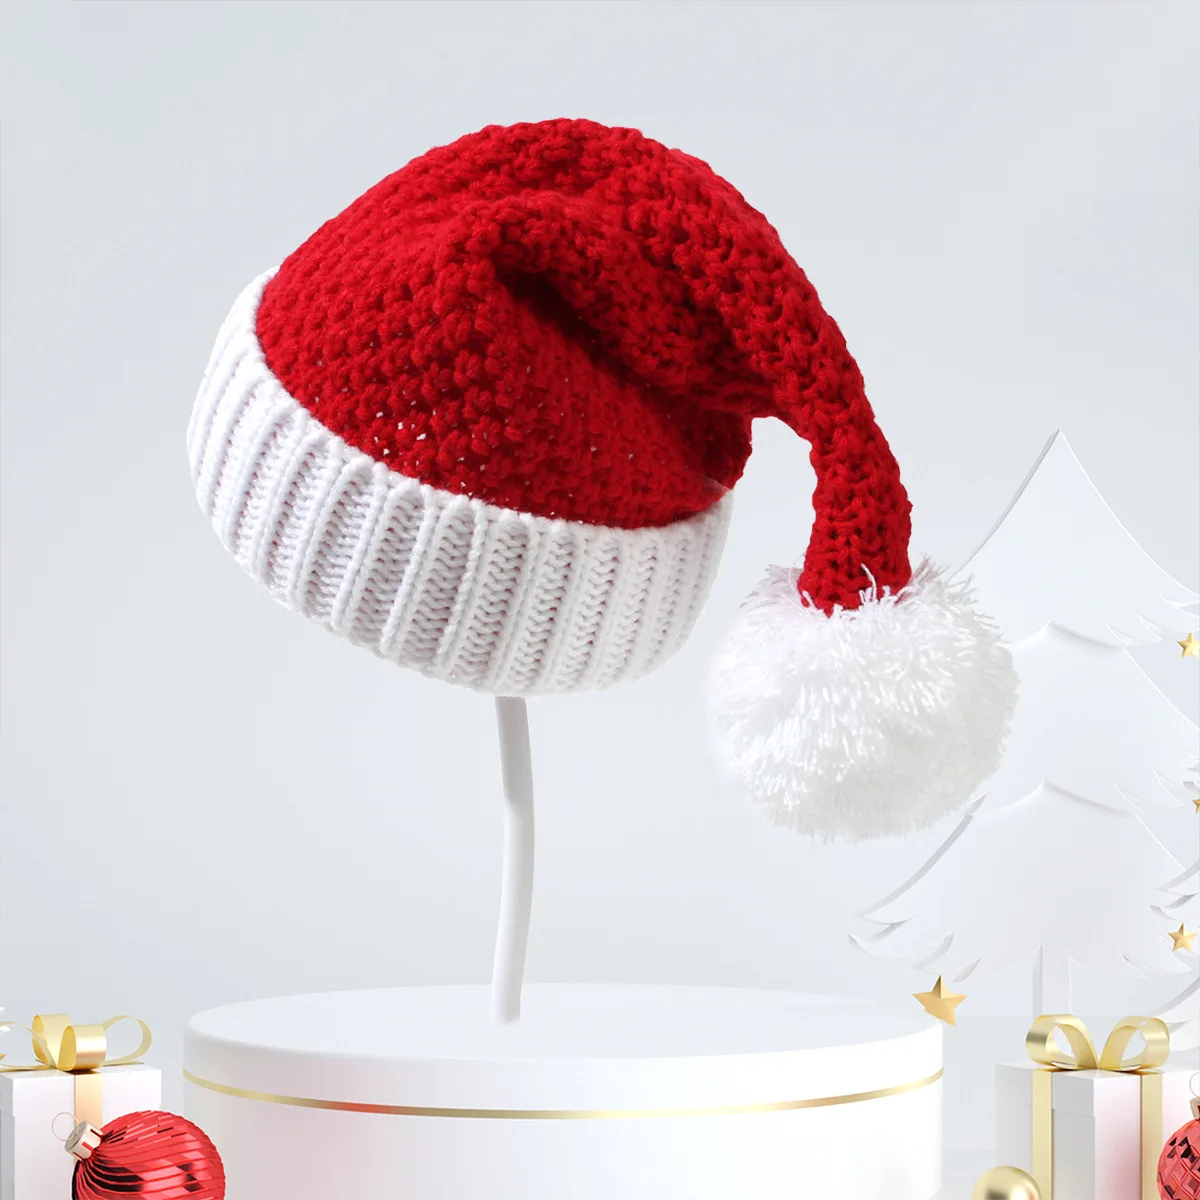 Santa Hat Knit Cap Hat Christmas Family Party Dress Up Men cute bunny ear moving hat animal plush hat jumping up moving ears pop up funny cap dress up for adult kids cosplay party hat